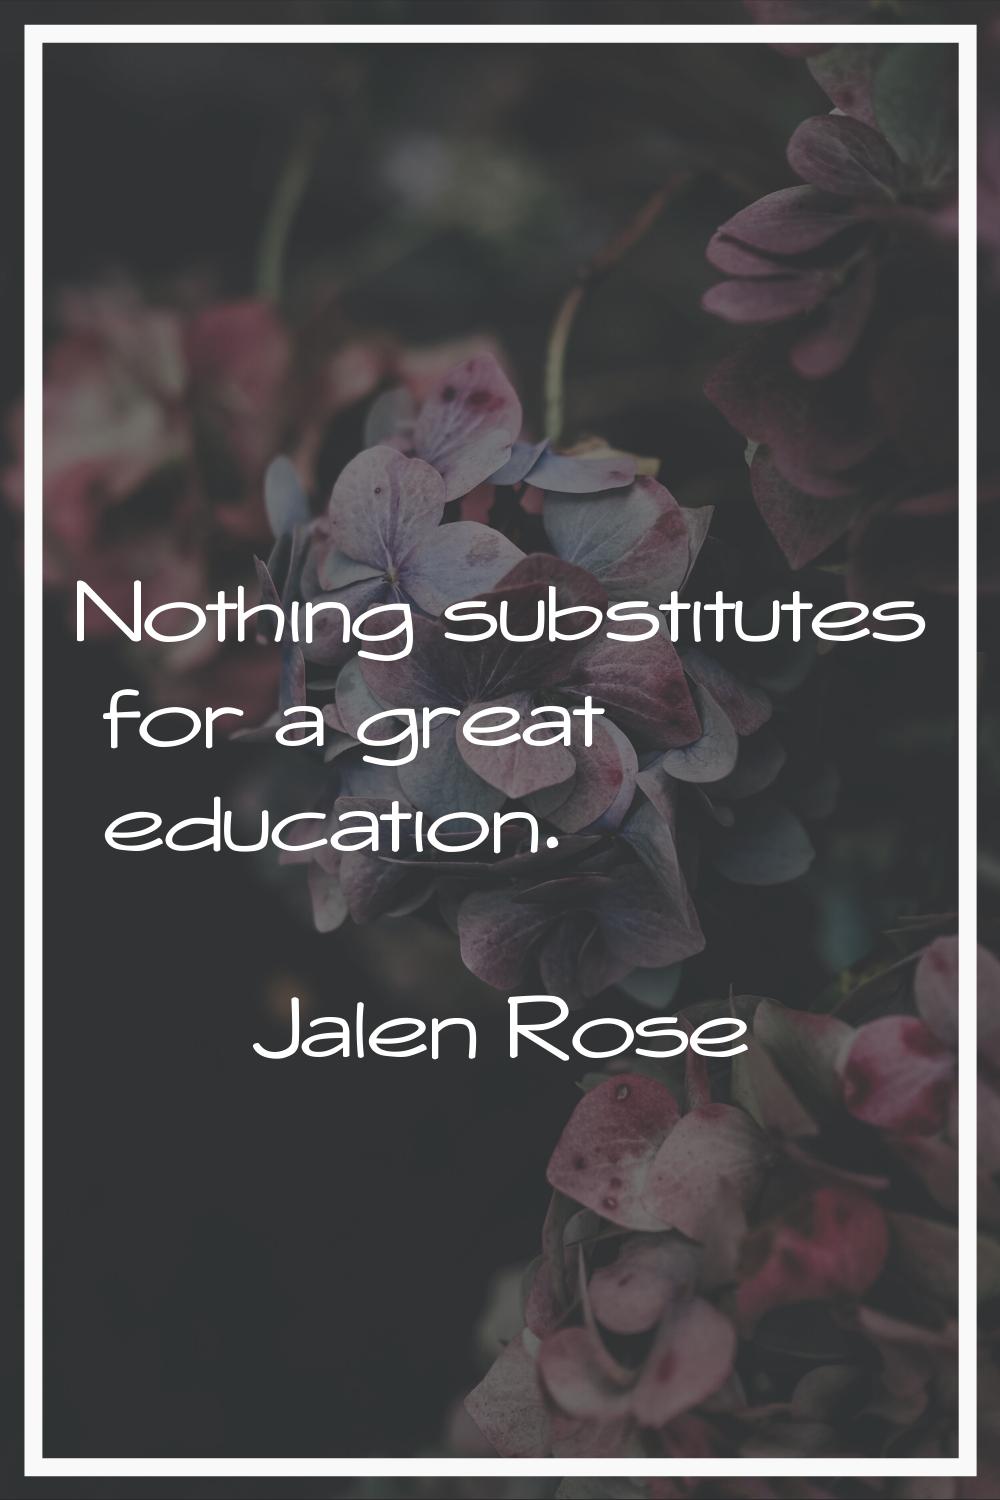 Nothing substitutes for a great education.